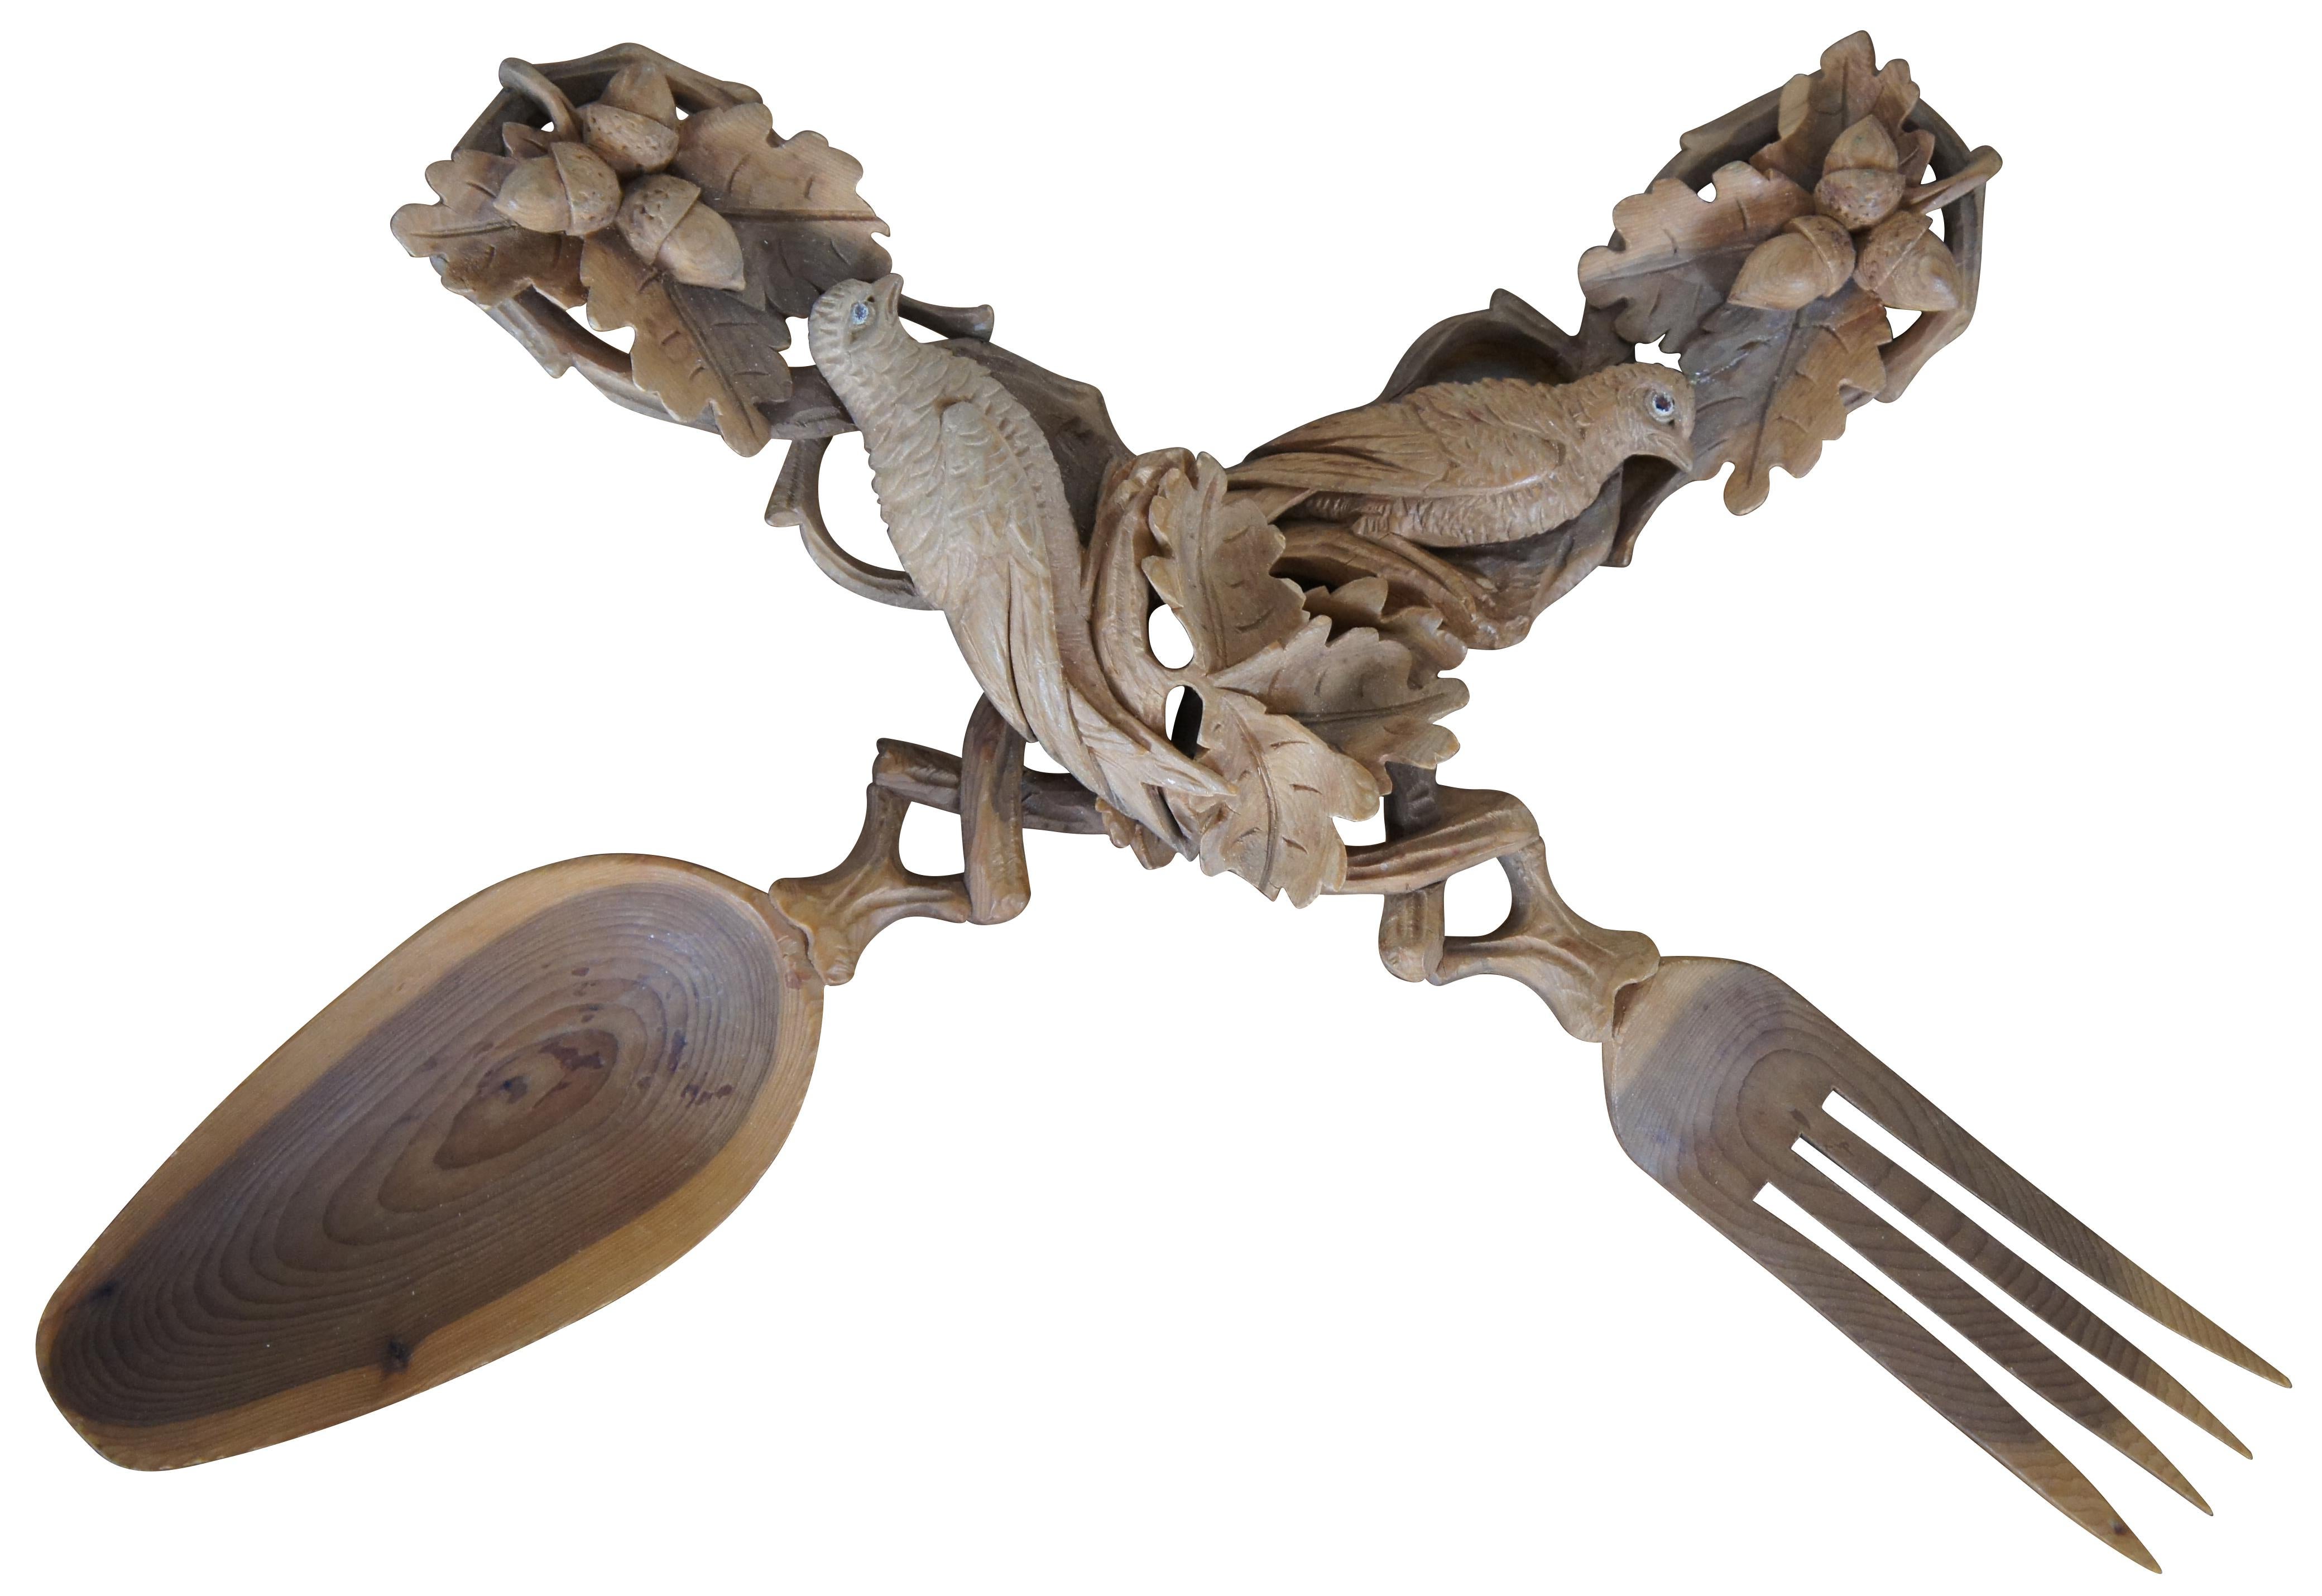 Vintage carved Black Forest German / Bavarian / Polish / folk art wood serving spoon and fork set / salad tossers intricately carved with high relief birds perched in pierced interlocking branches, full of oak leaves and acorns. Measure: 11